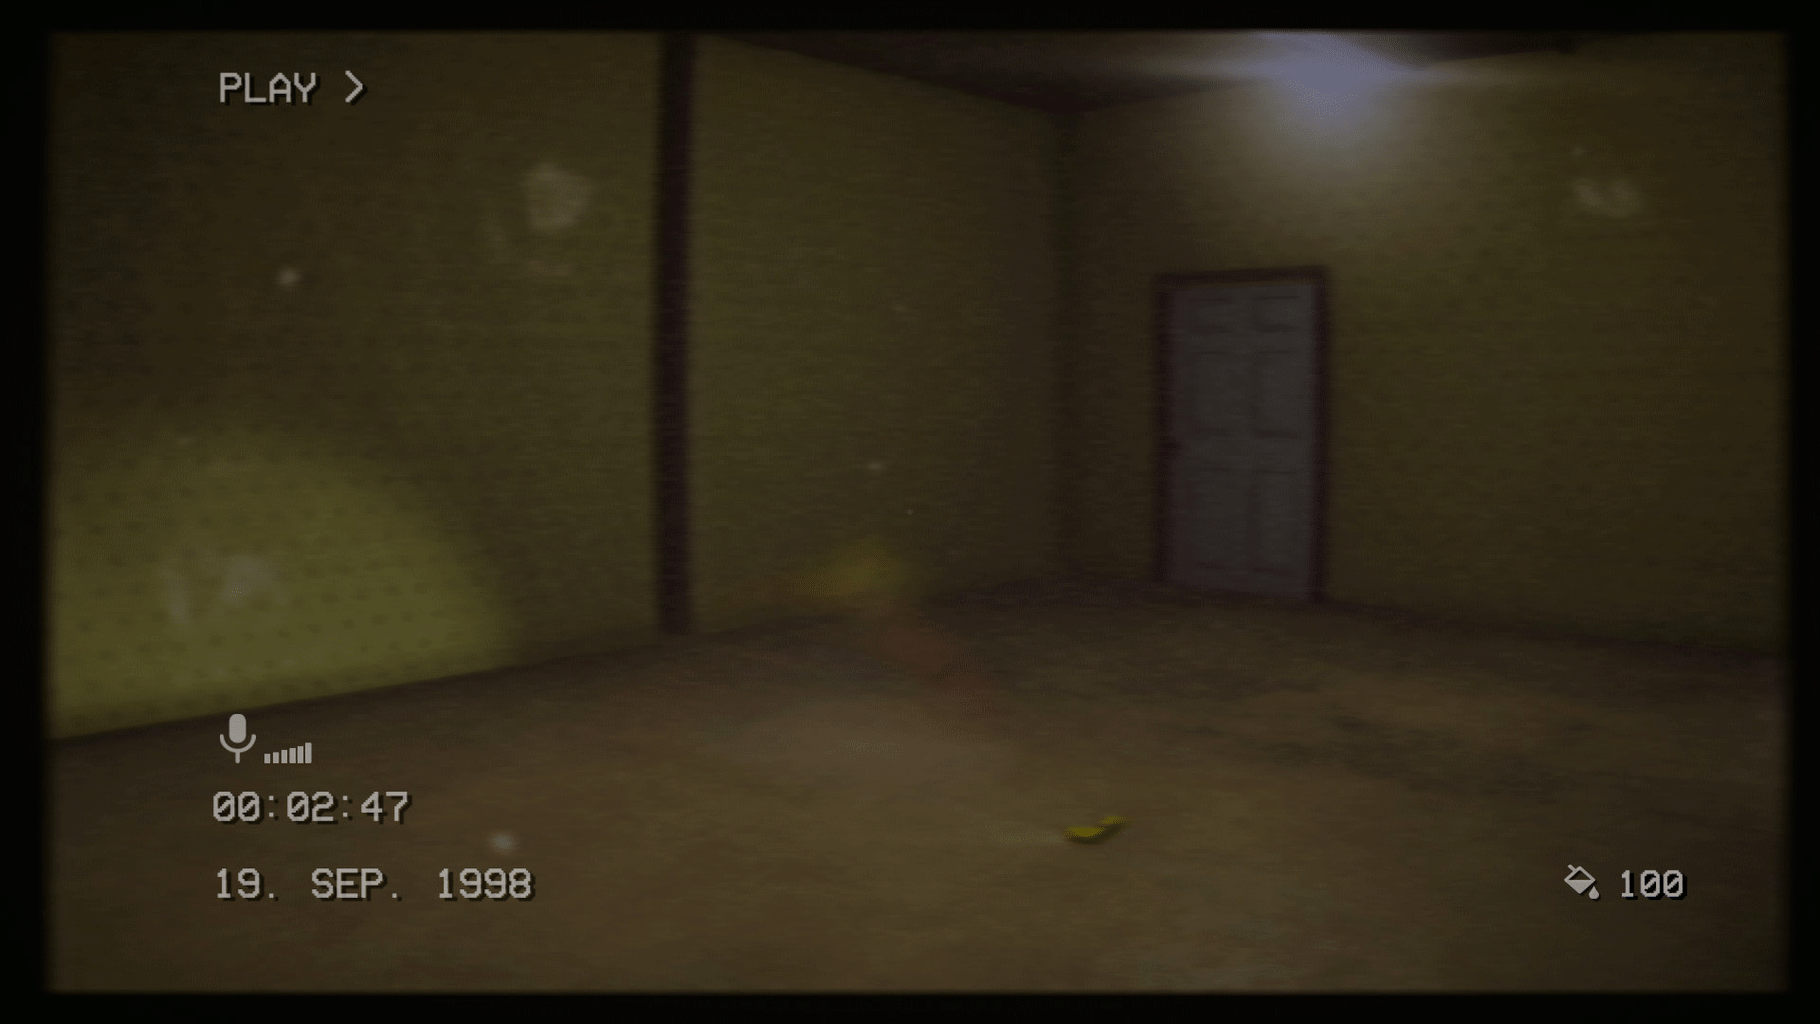 The Backrooms 1998 - Found Footage Survival Horror Game on Steam